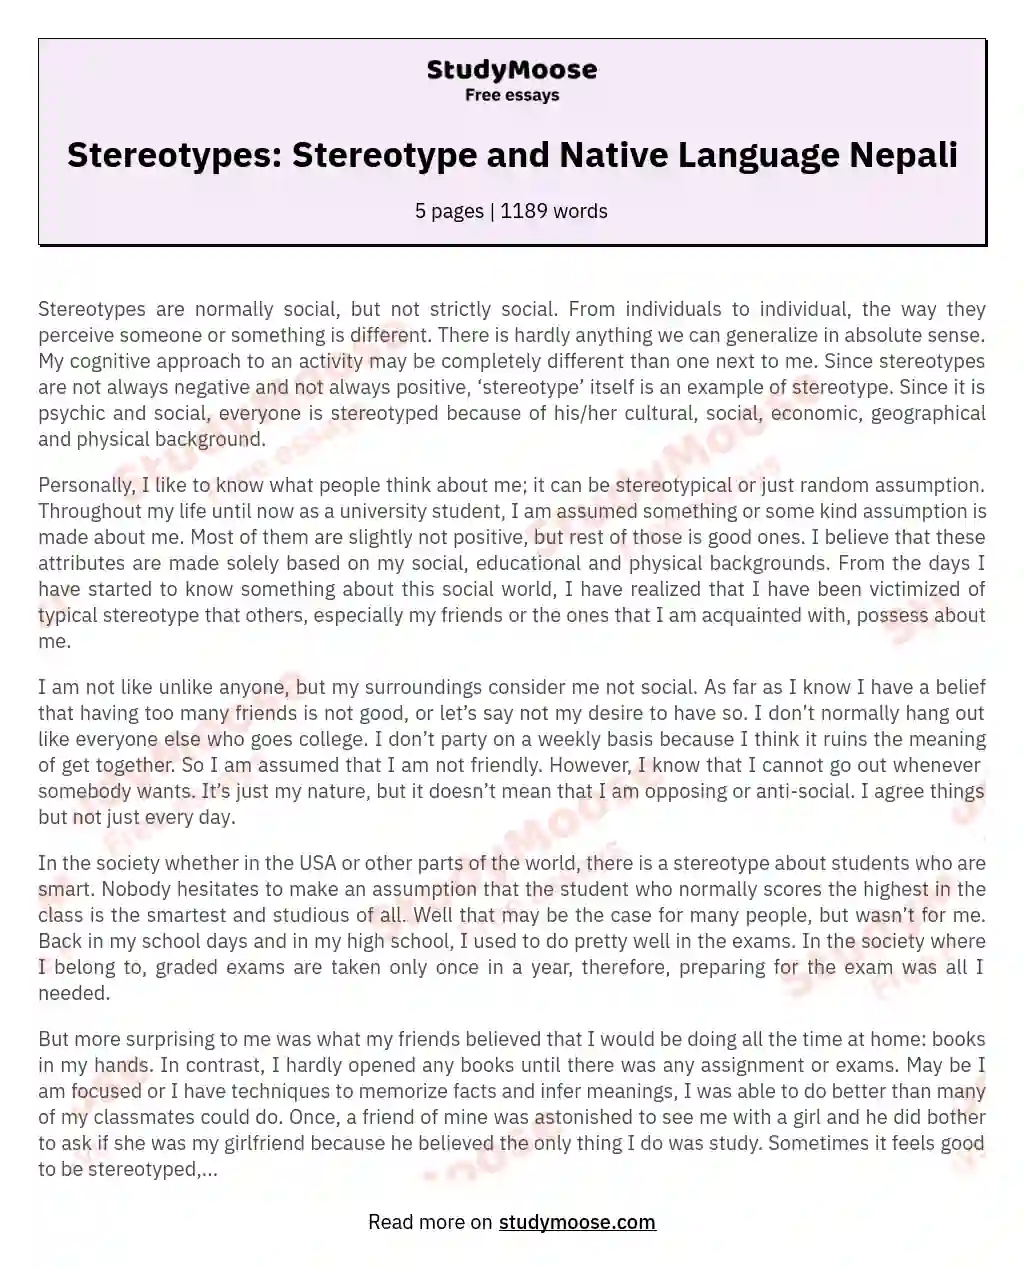 Stereotypes: Stereotype and Native Language Nepali essay